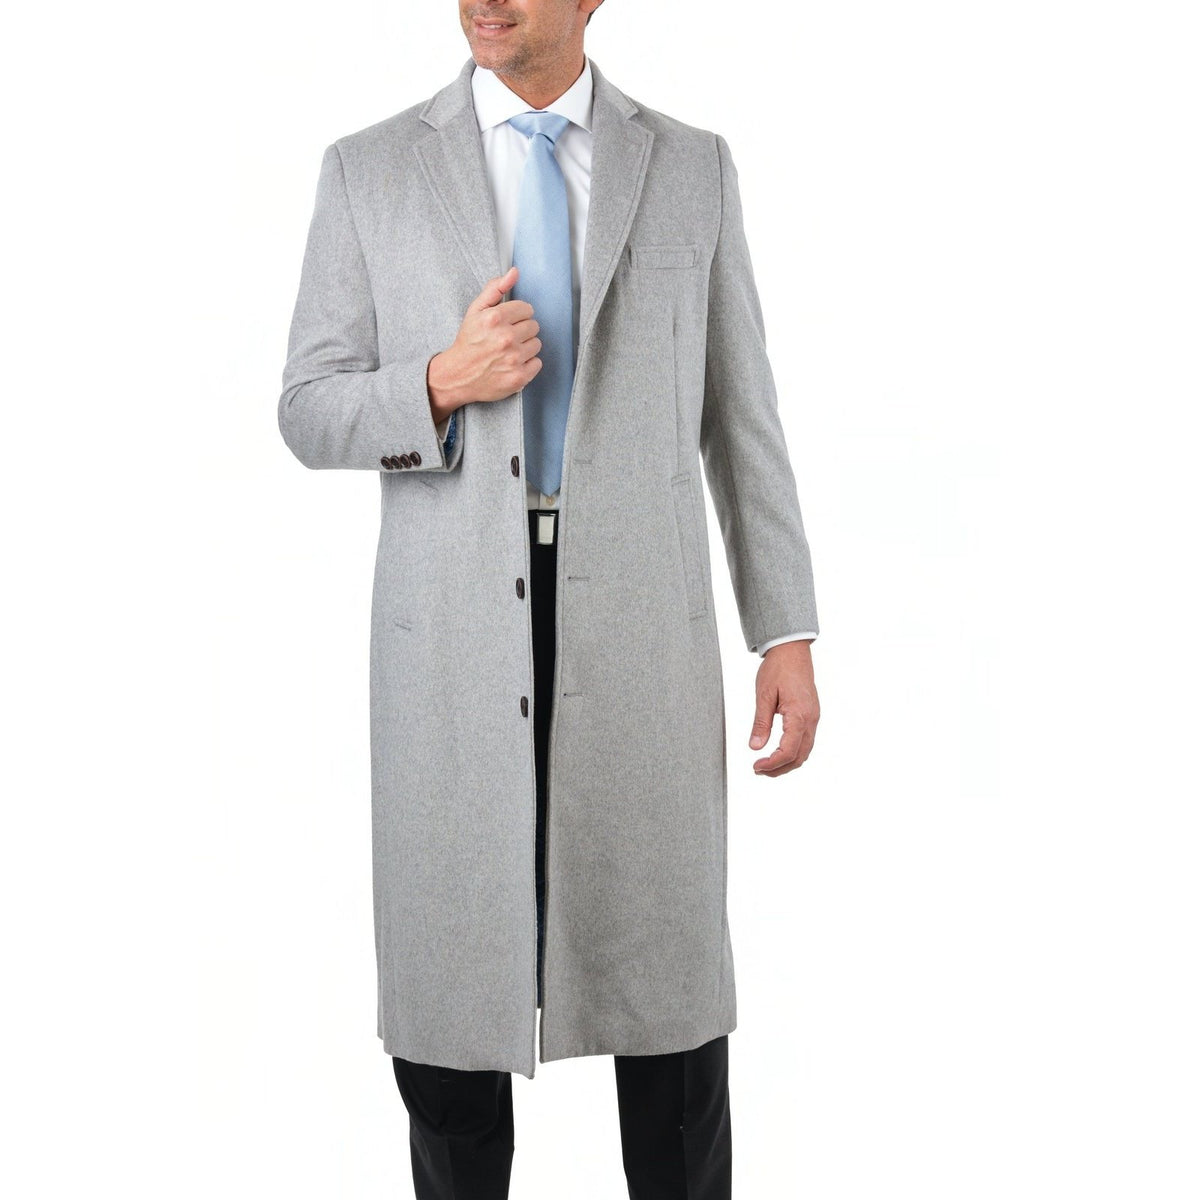 Label E OUTERWEAR Mens Regular Fit Solid Light Gray Full Length Wool Cashmere Overcoat Top Coat